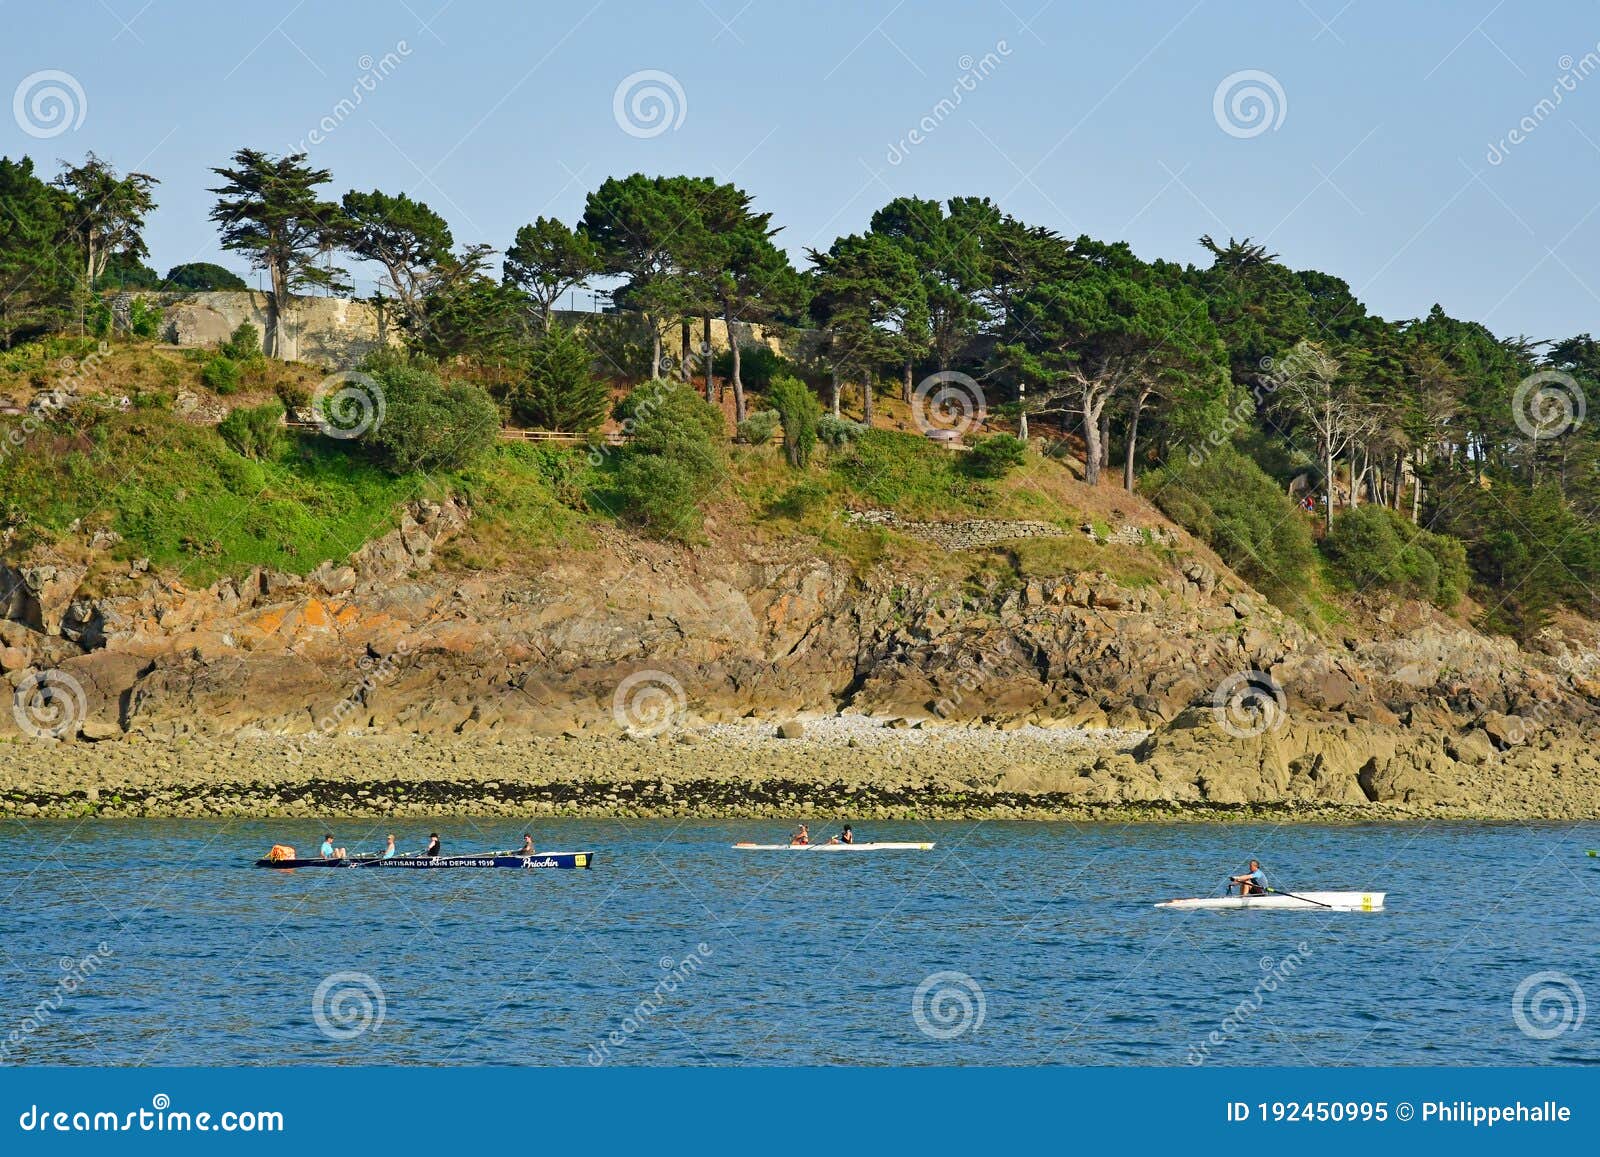 Saint Malo; France - July 28 2019 : Picturesque City in Summer ...